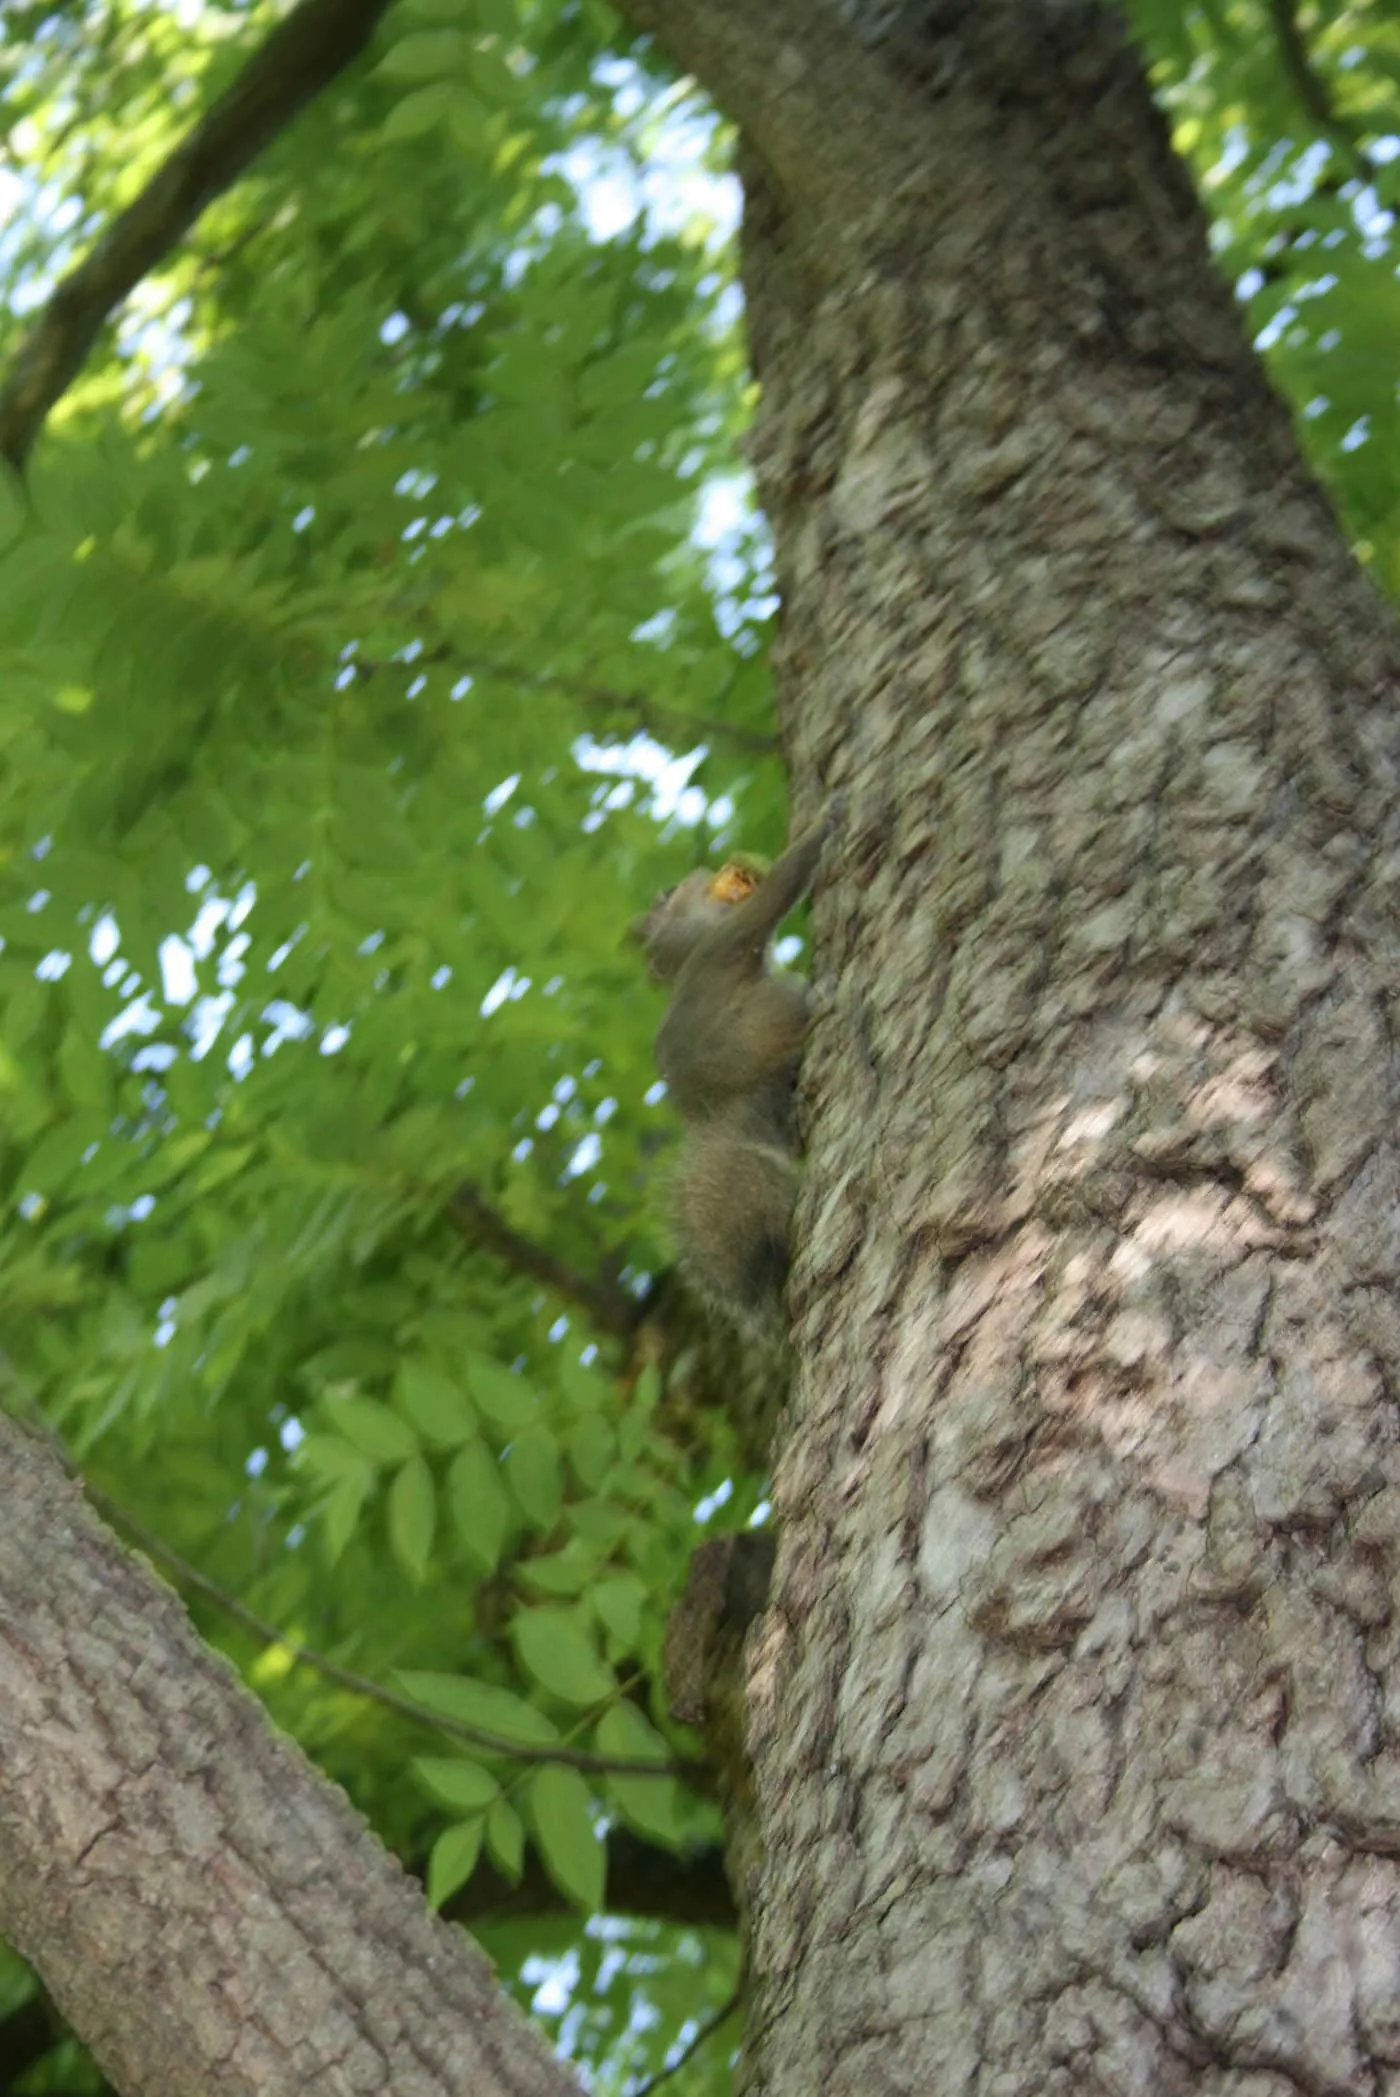 Squirrels in Olney, Illinois: Home of the White Squirrels